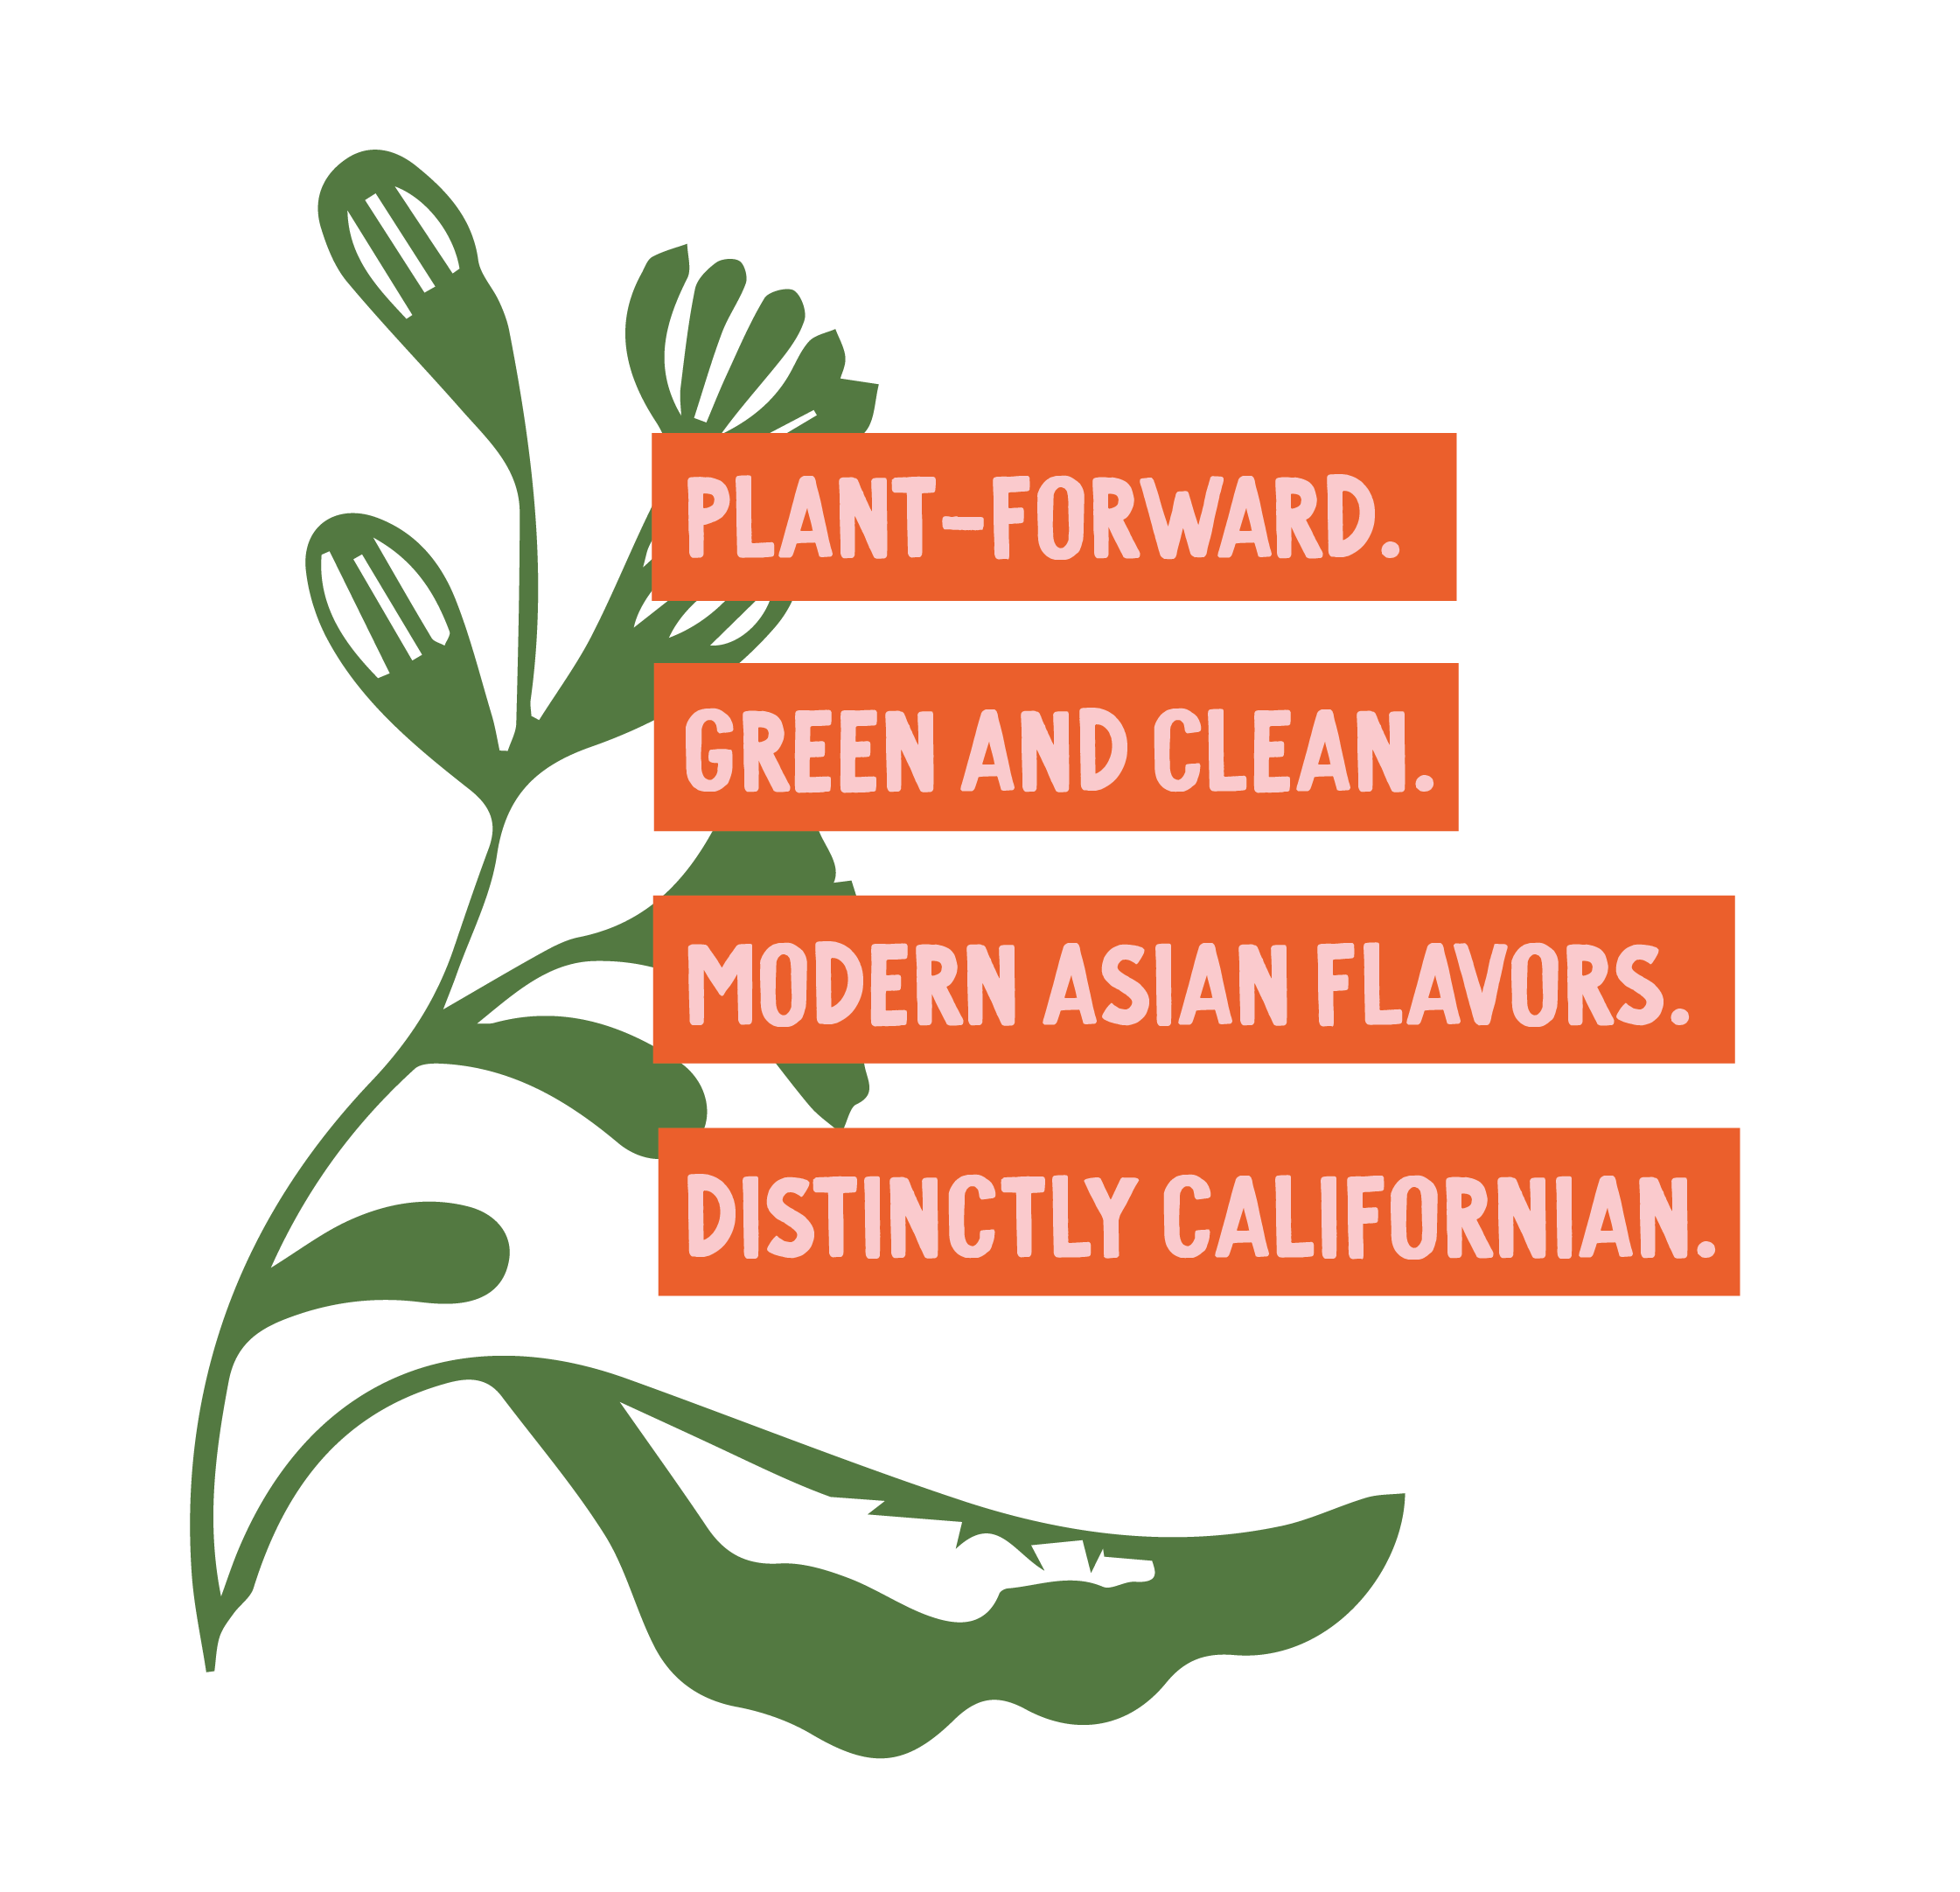 Plant Forward. Green and Clean. Modern Asian flavors. Distinctly Californian.